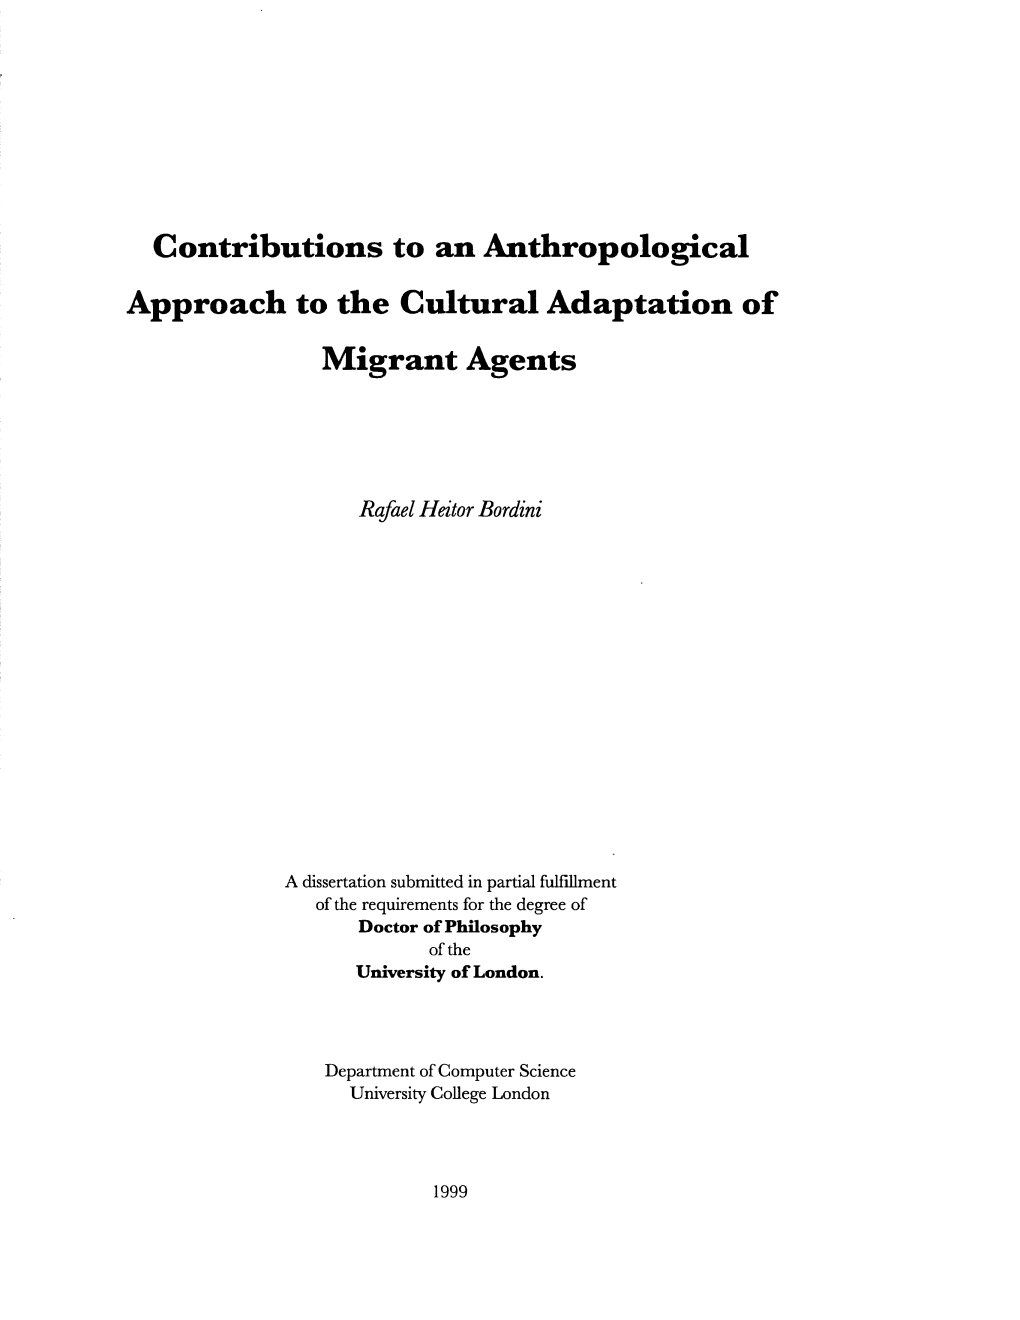 Contributions to an Anthropological Approach to the Cultural Adaptation of Migrant Agents